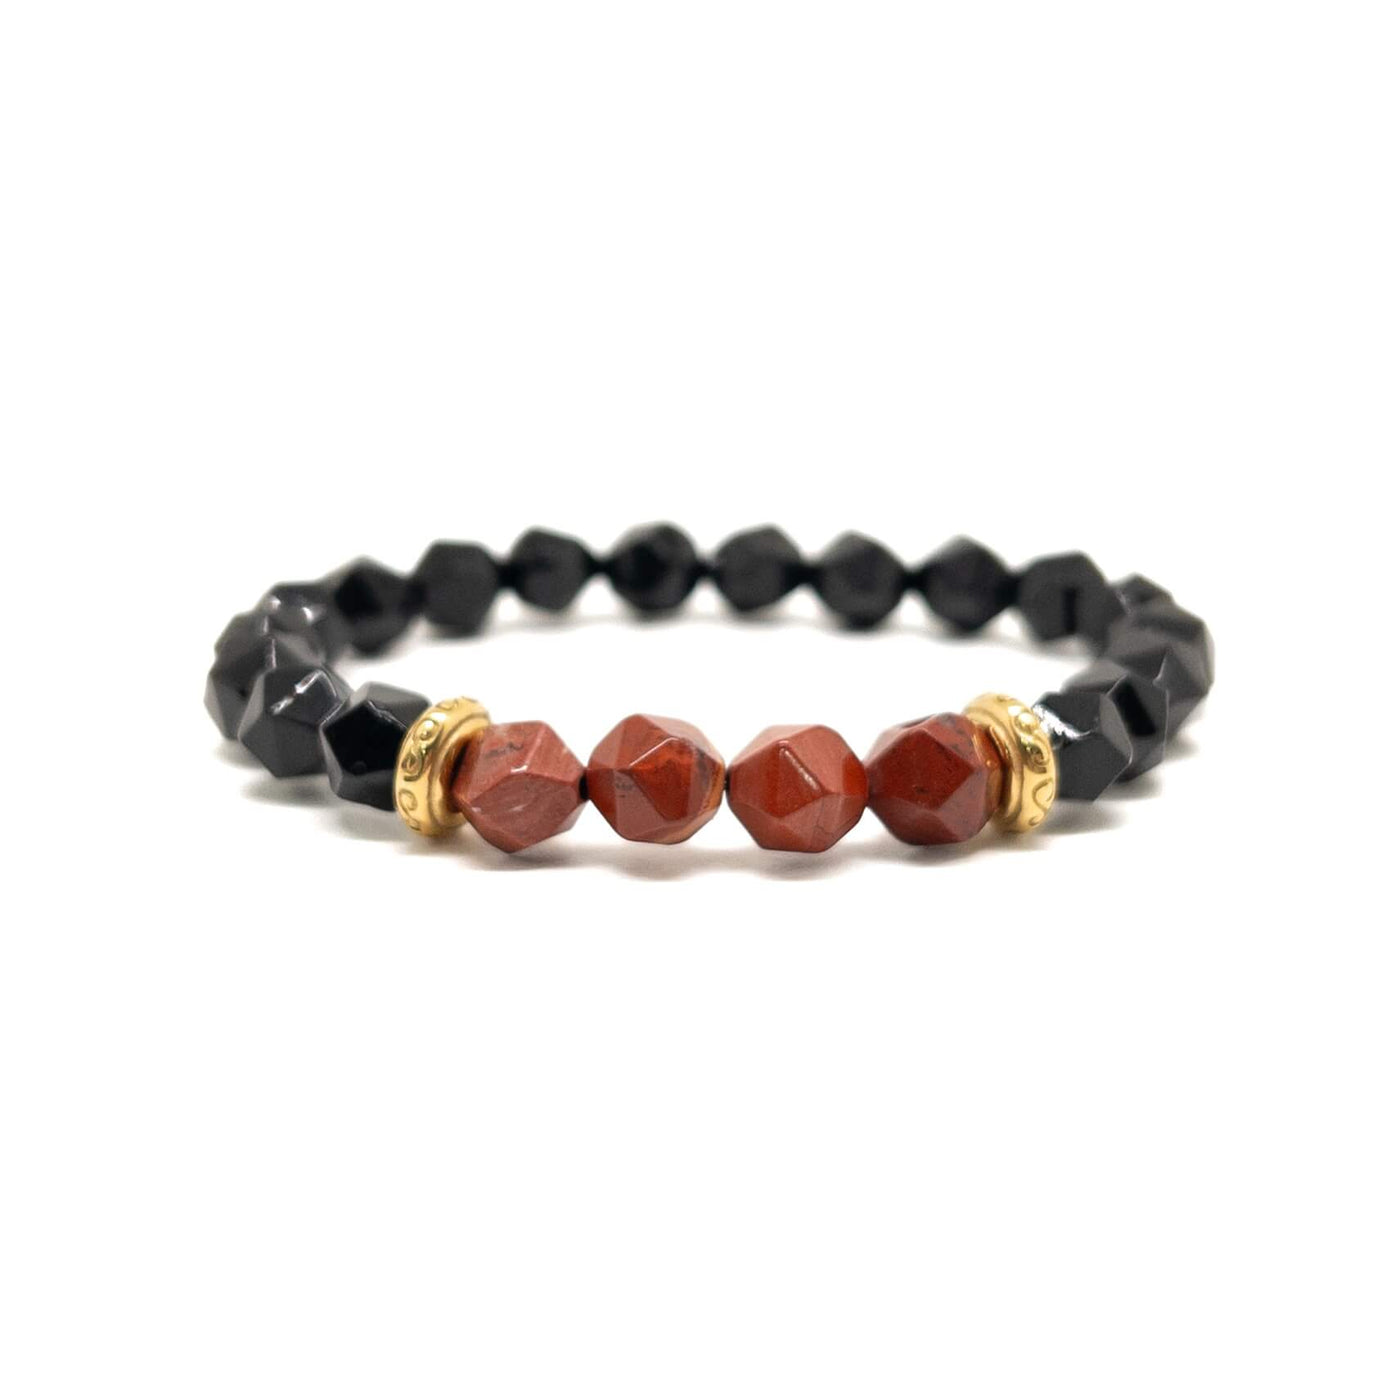 The Faceted Black Agate and Red Jasper